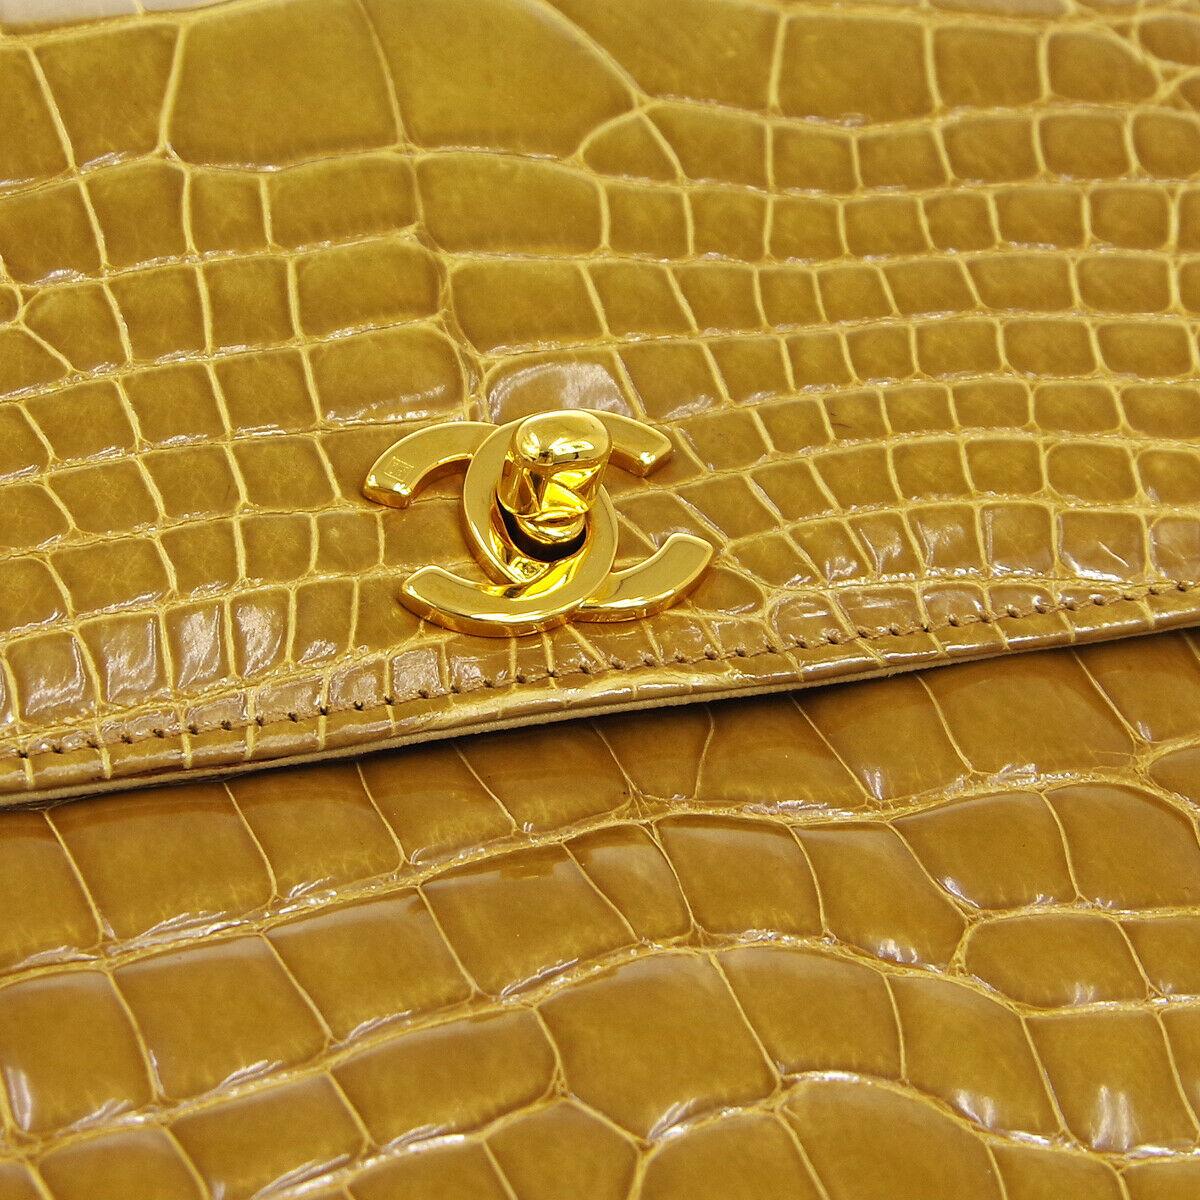 The Exotic Chanel to Complete Your Collection.

Since announcing the discontinuation of exotic skin handbags, the demand for exotic Chanel has increased tenfold. And the demand for crocodile skin Chanel is no exception. Crafted of exotic crocodile